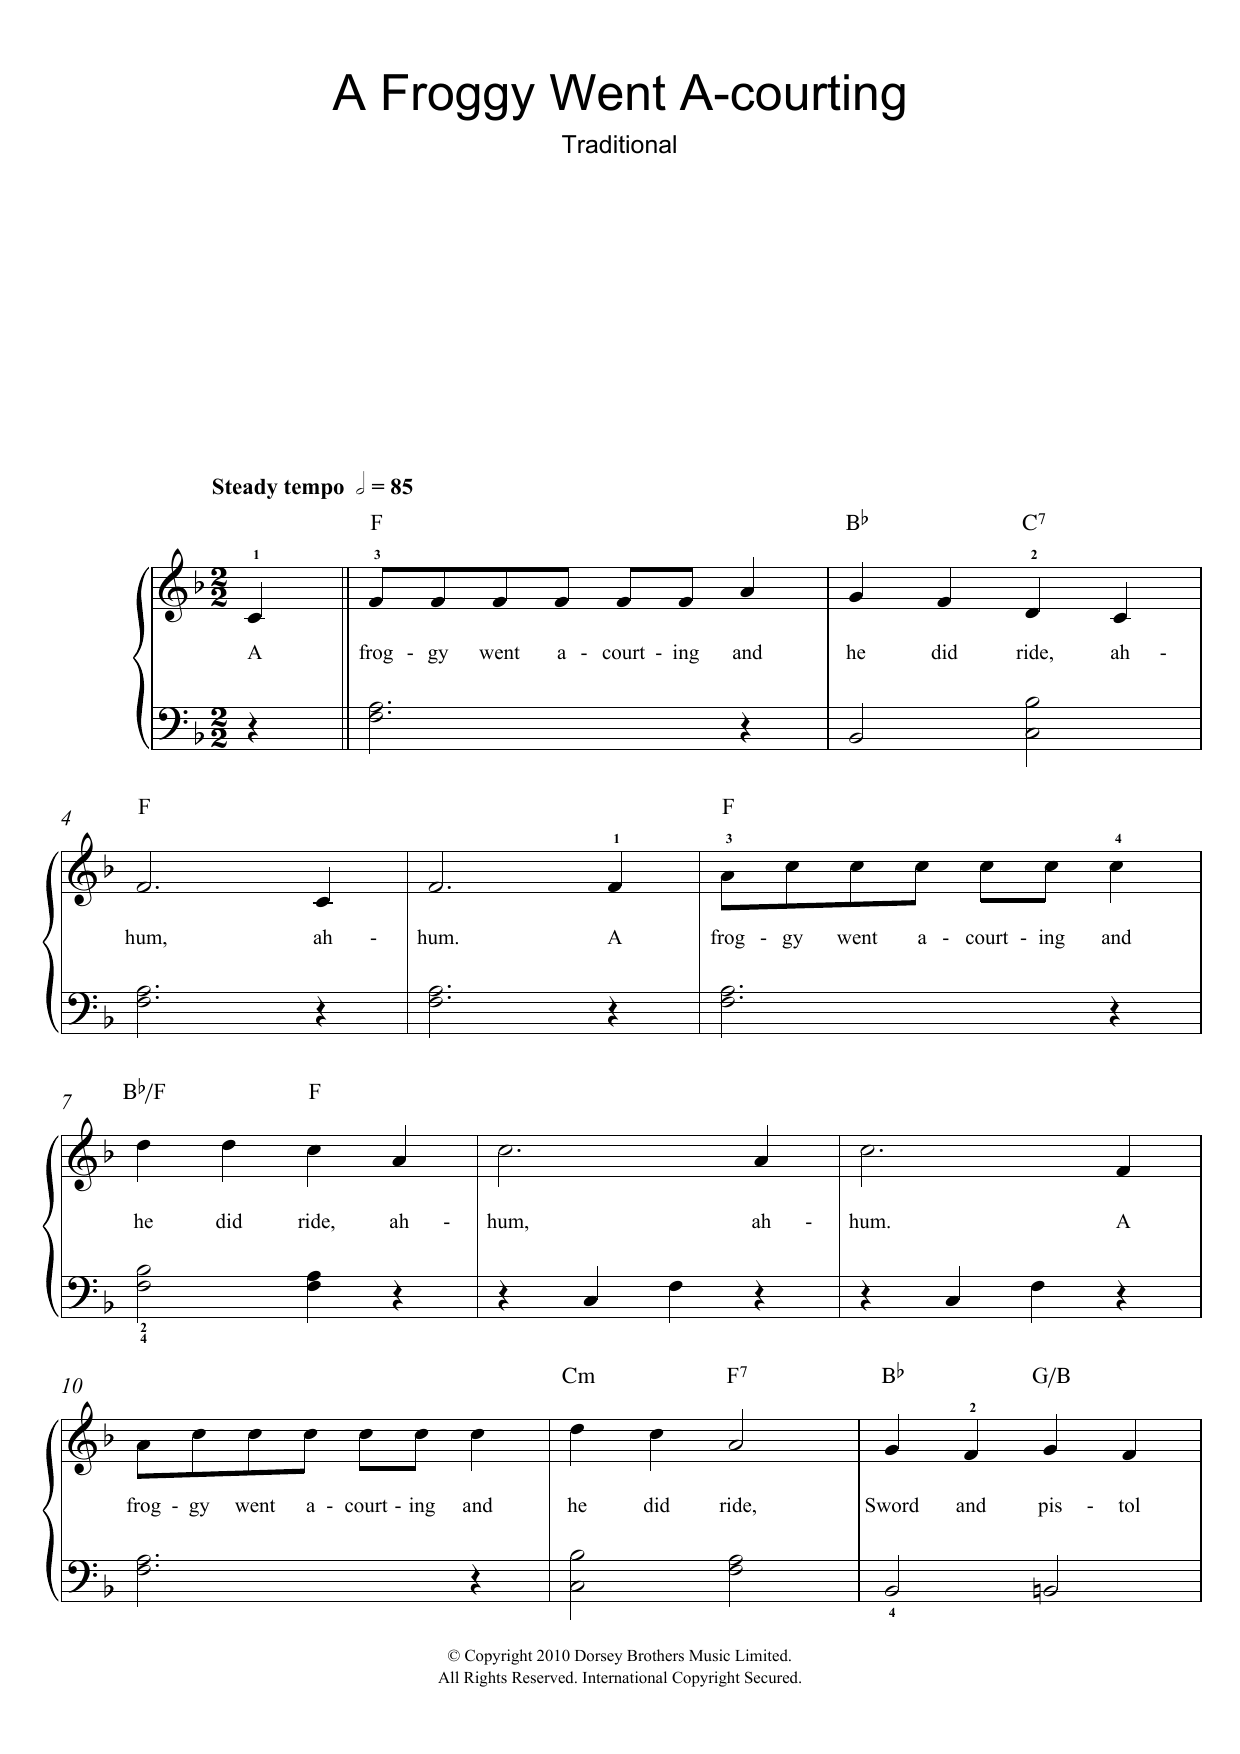 Download Traditional Froggy Went A-Courting Sheet Music